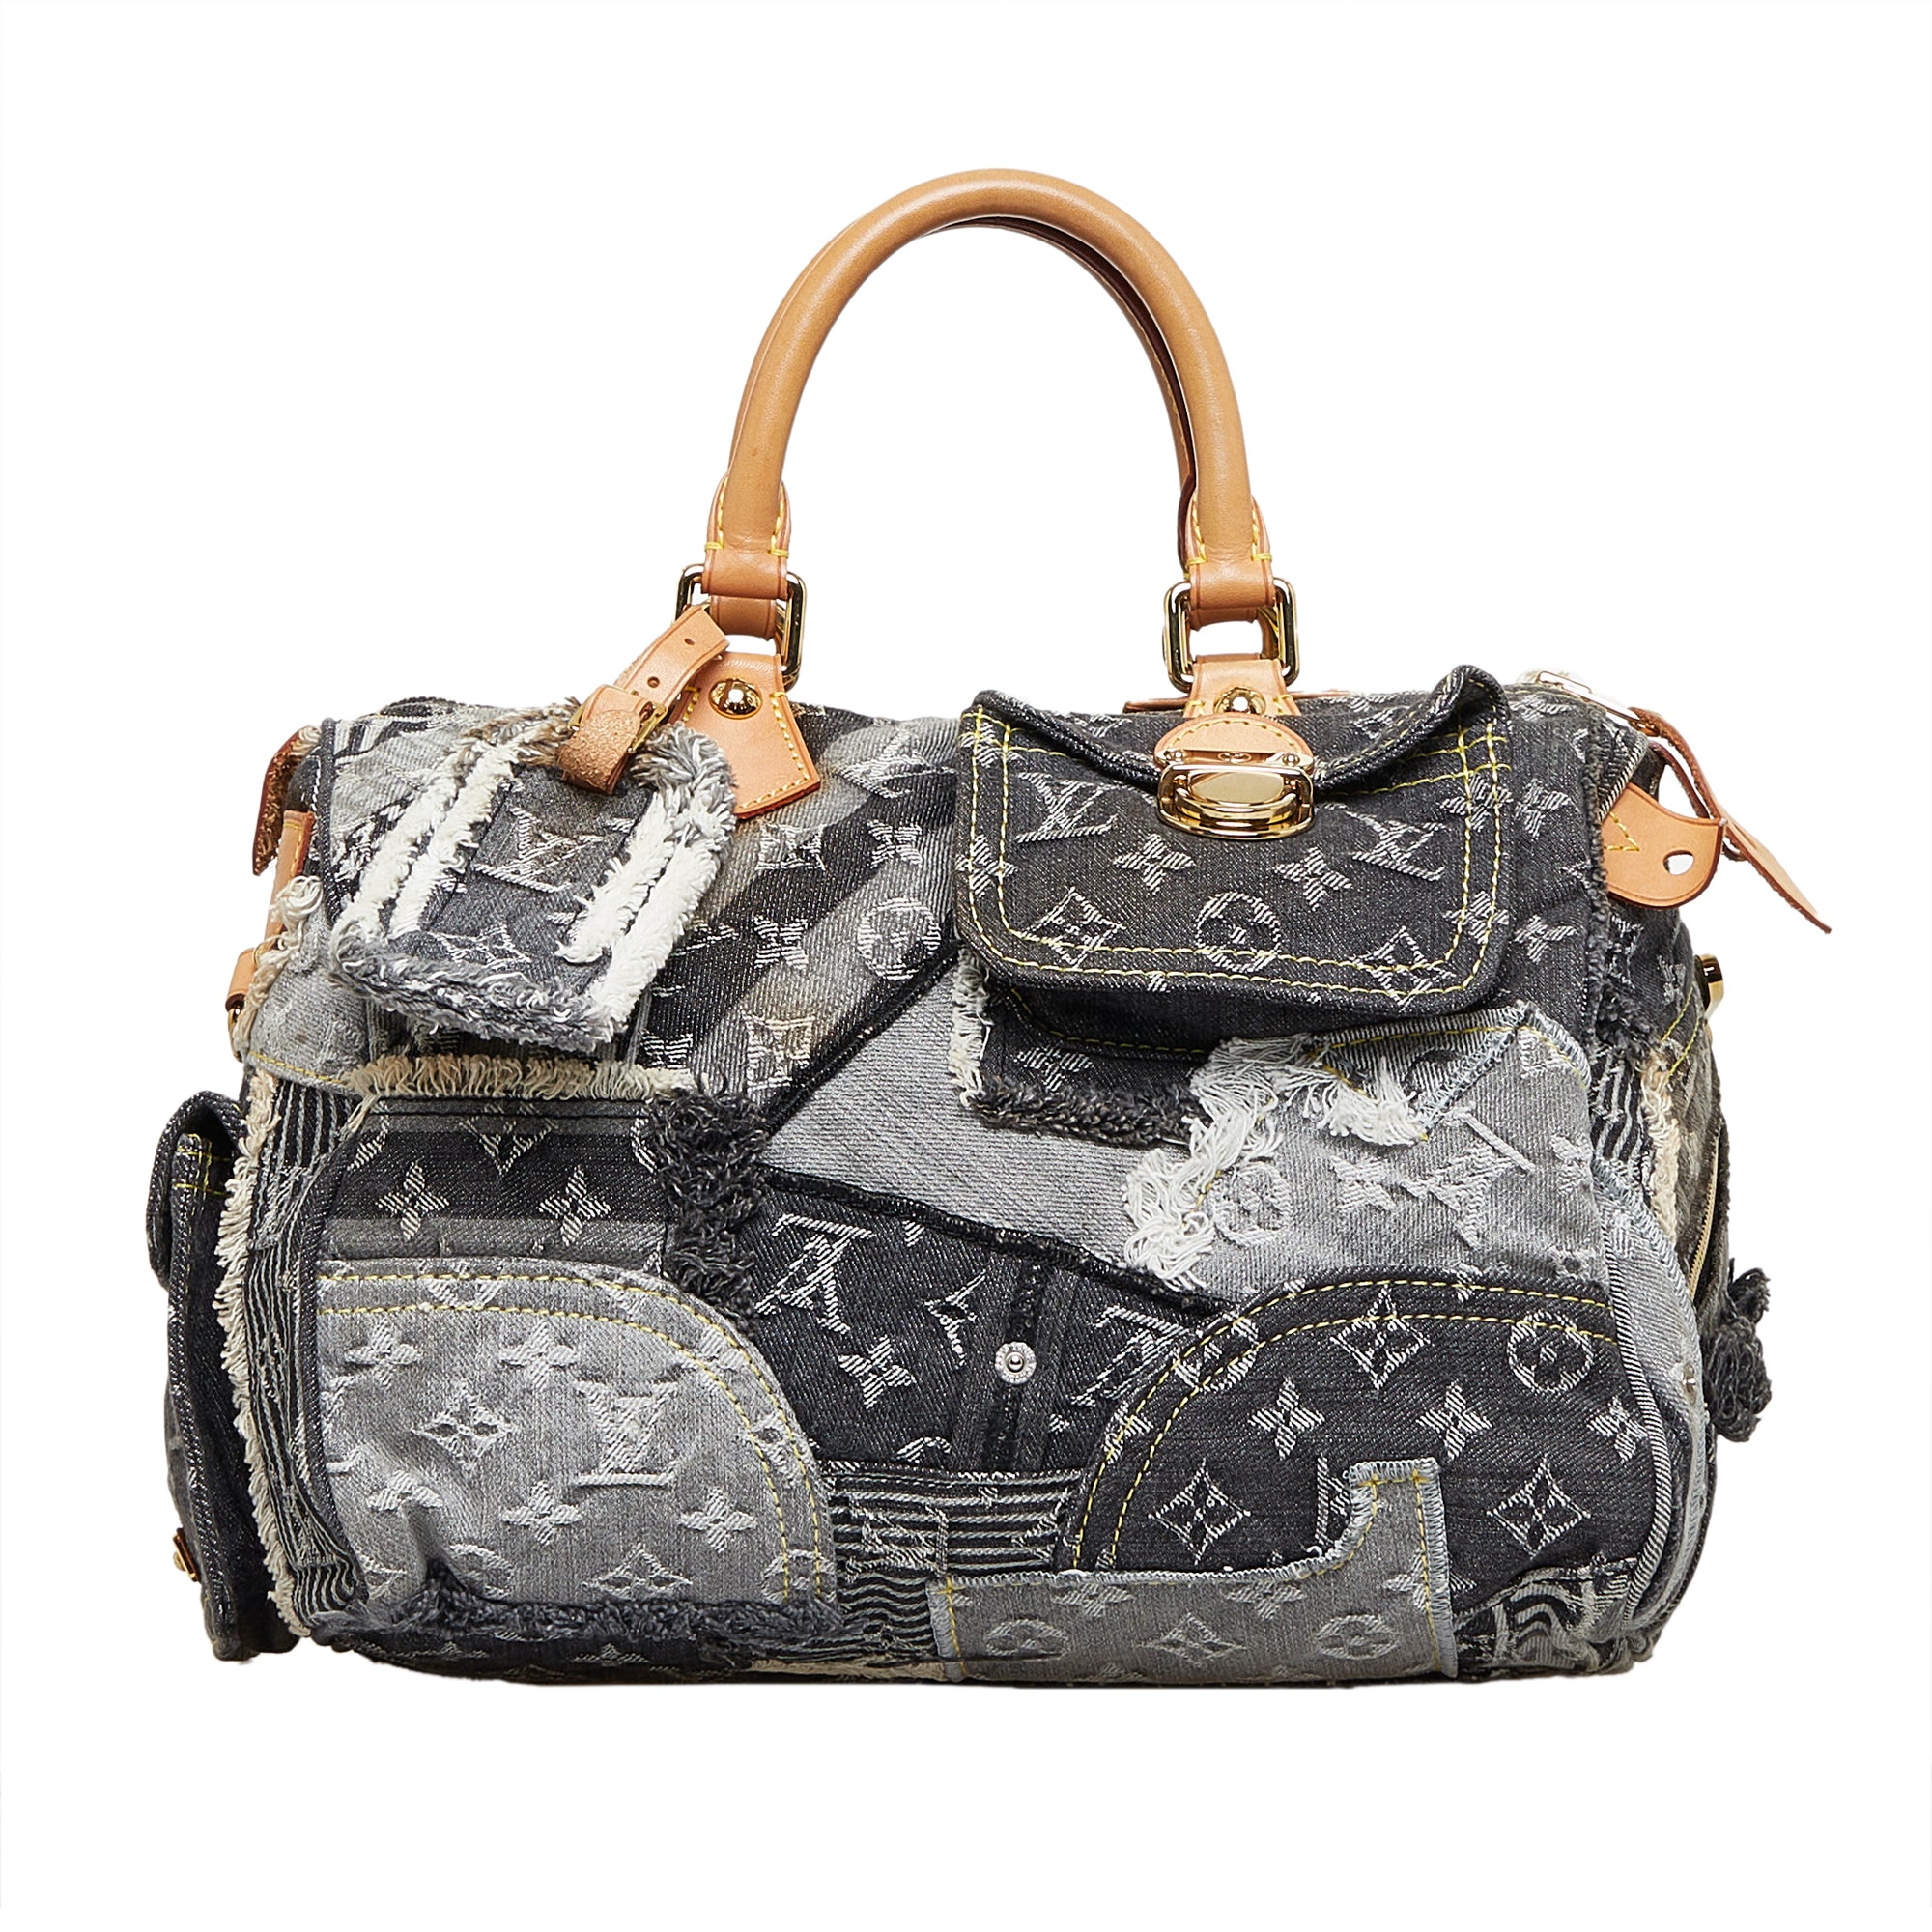 Authentic Louis Vuitton limited edition grand sac tapestry tote